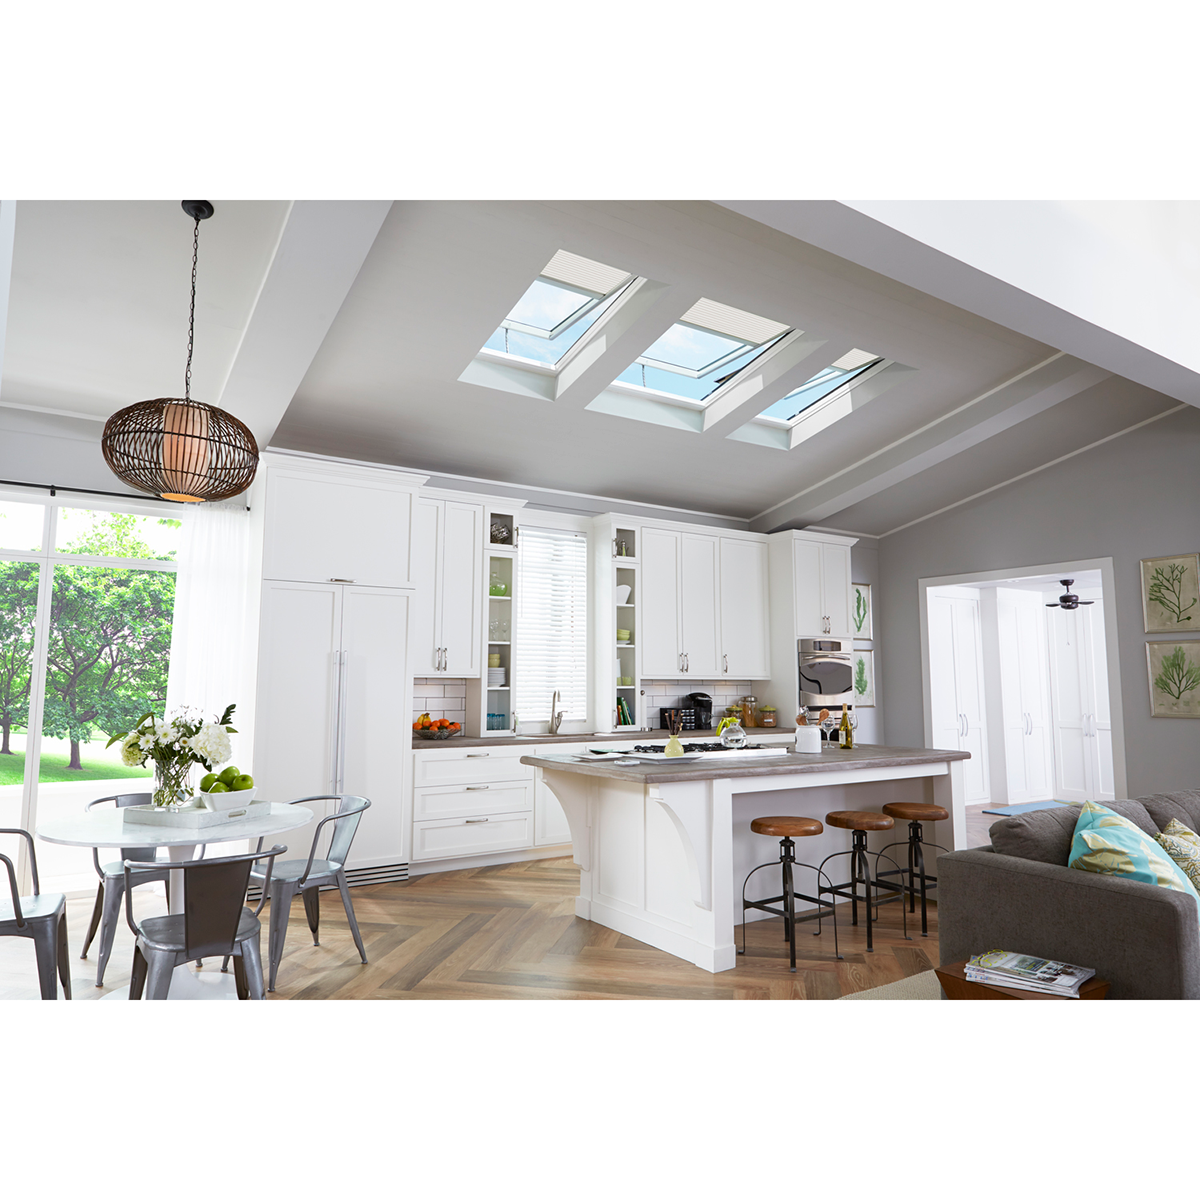 Solar Powered Curb-Mount Skylight with Laminated Low-E3 Glass - 30-1/2 in. x 30-1/2 in. - VCS 3030